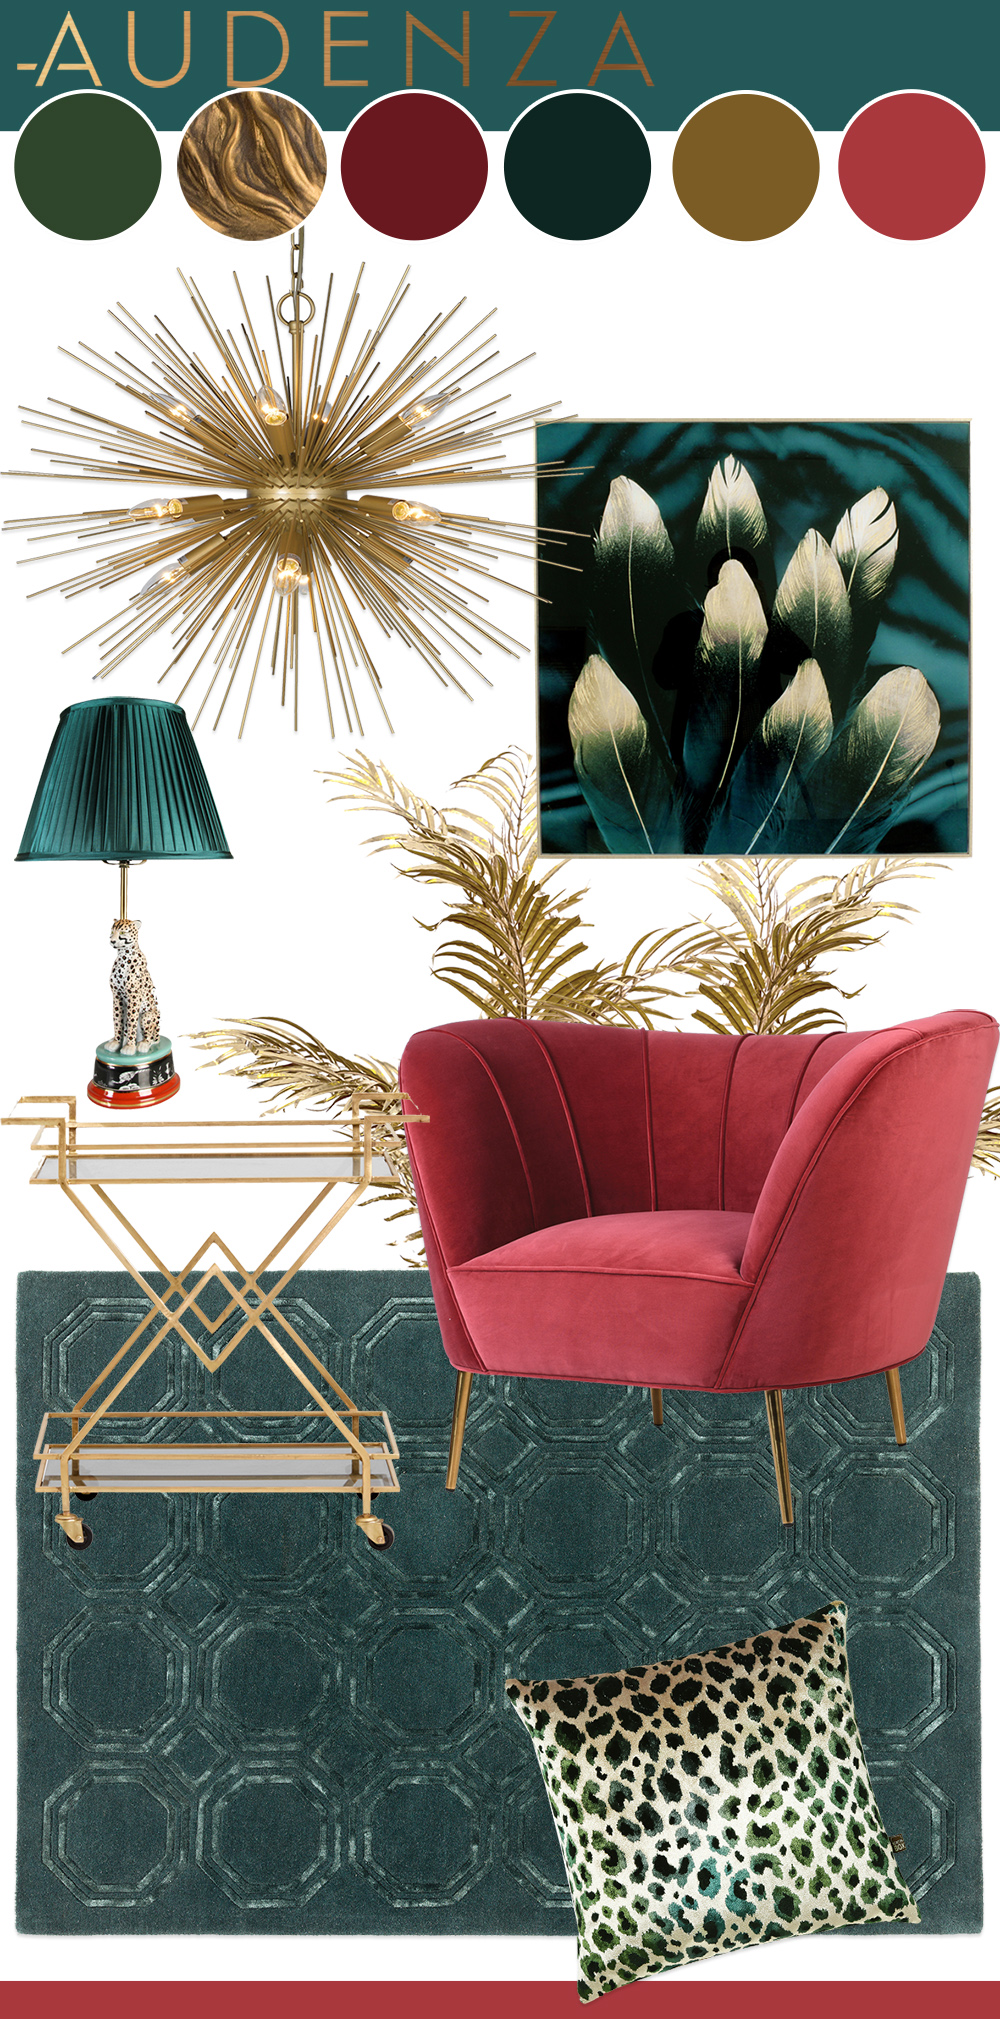 A luxurious and sophisticated living room colour scheme with a teal and cherry pink colour palette and glamorous gold home accessories